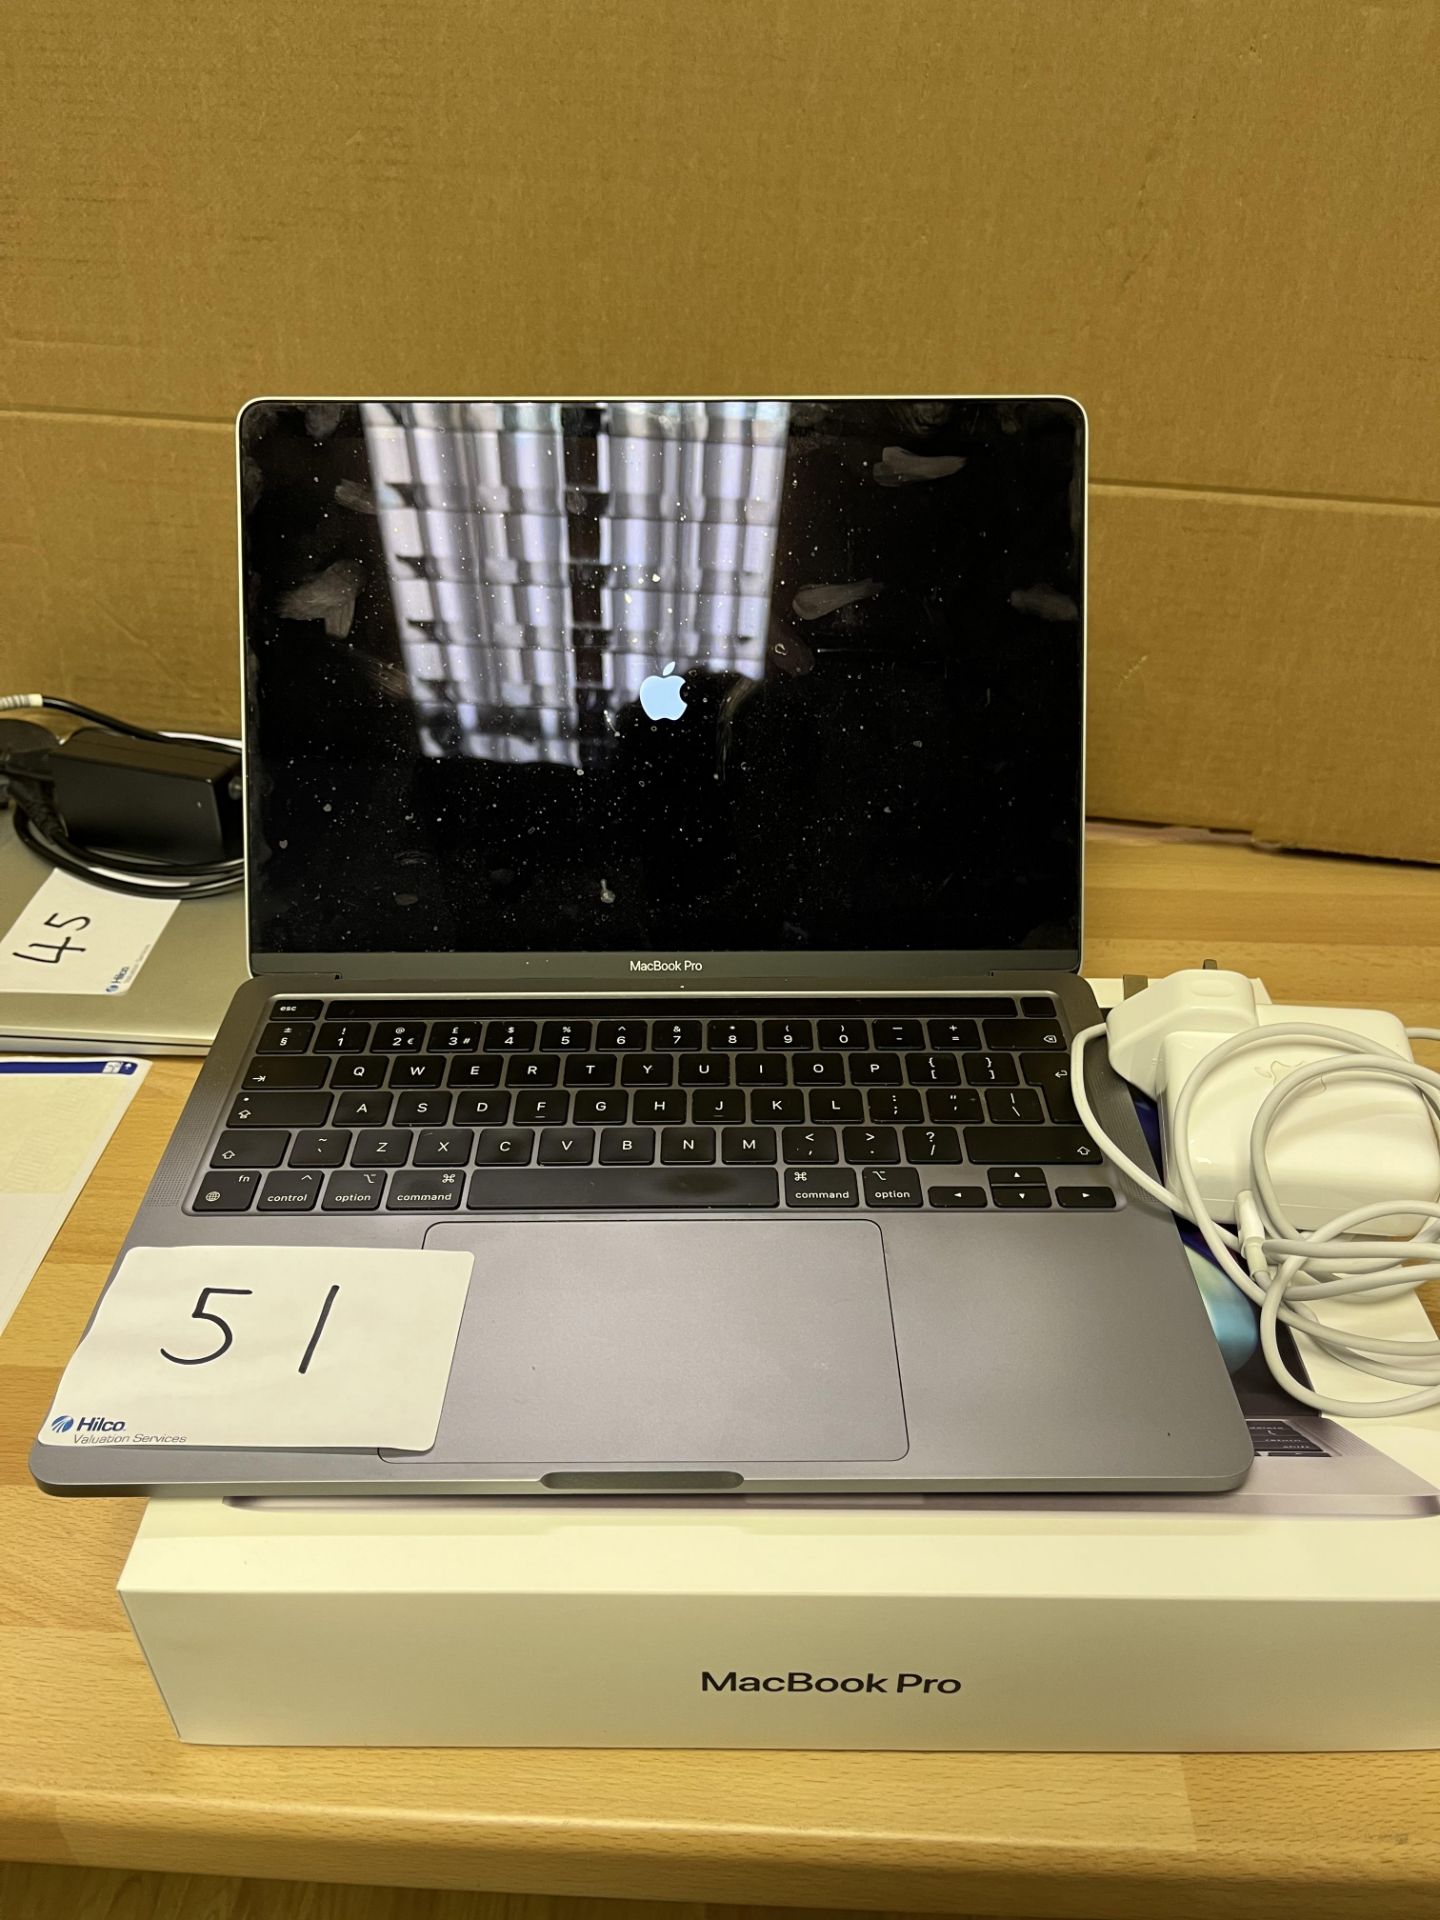 MacBook Pro (13-inch, M1, 2020) 8GB Memory With charger and box Serial Number FVFFGS22Q05D